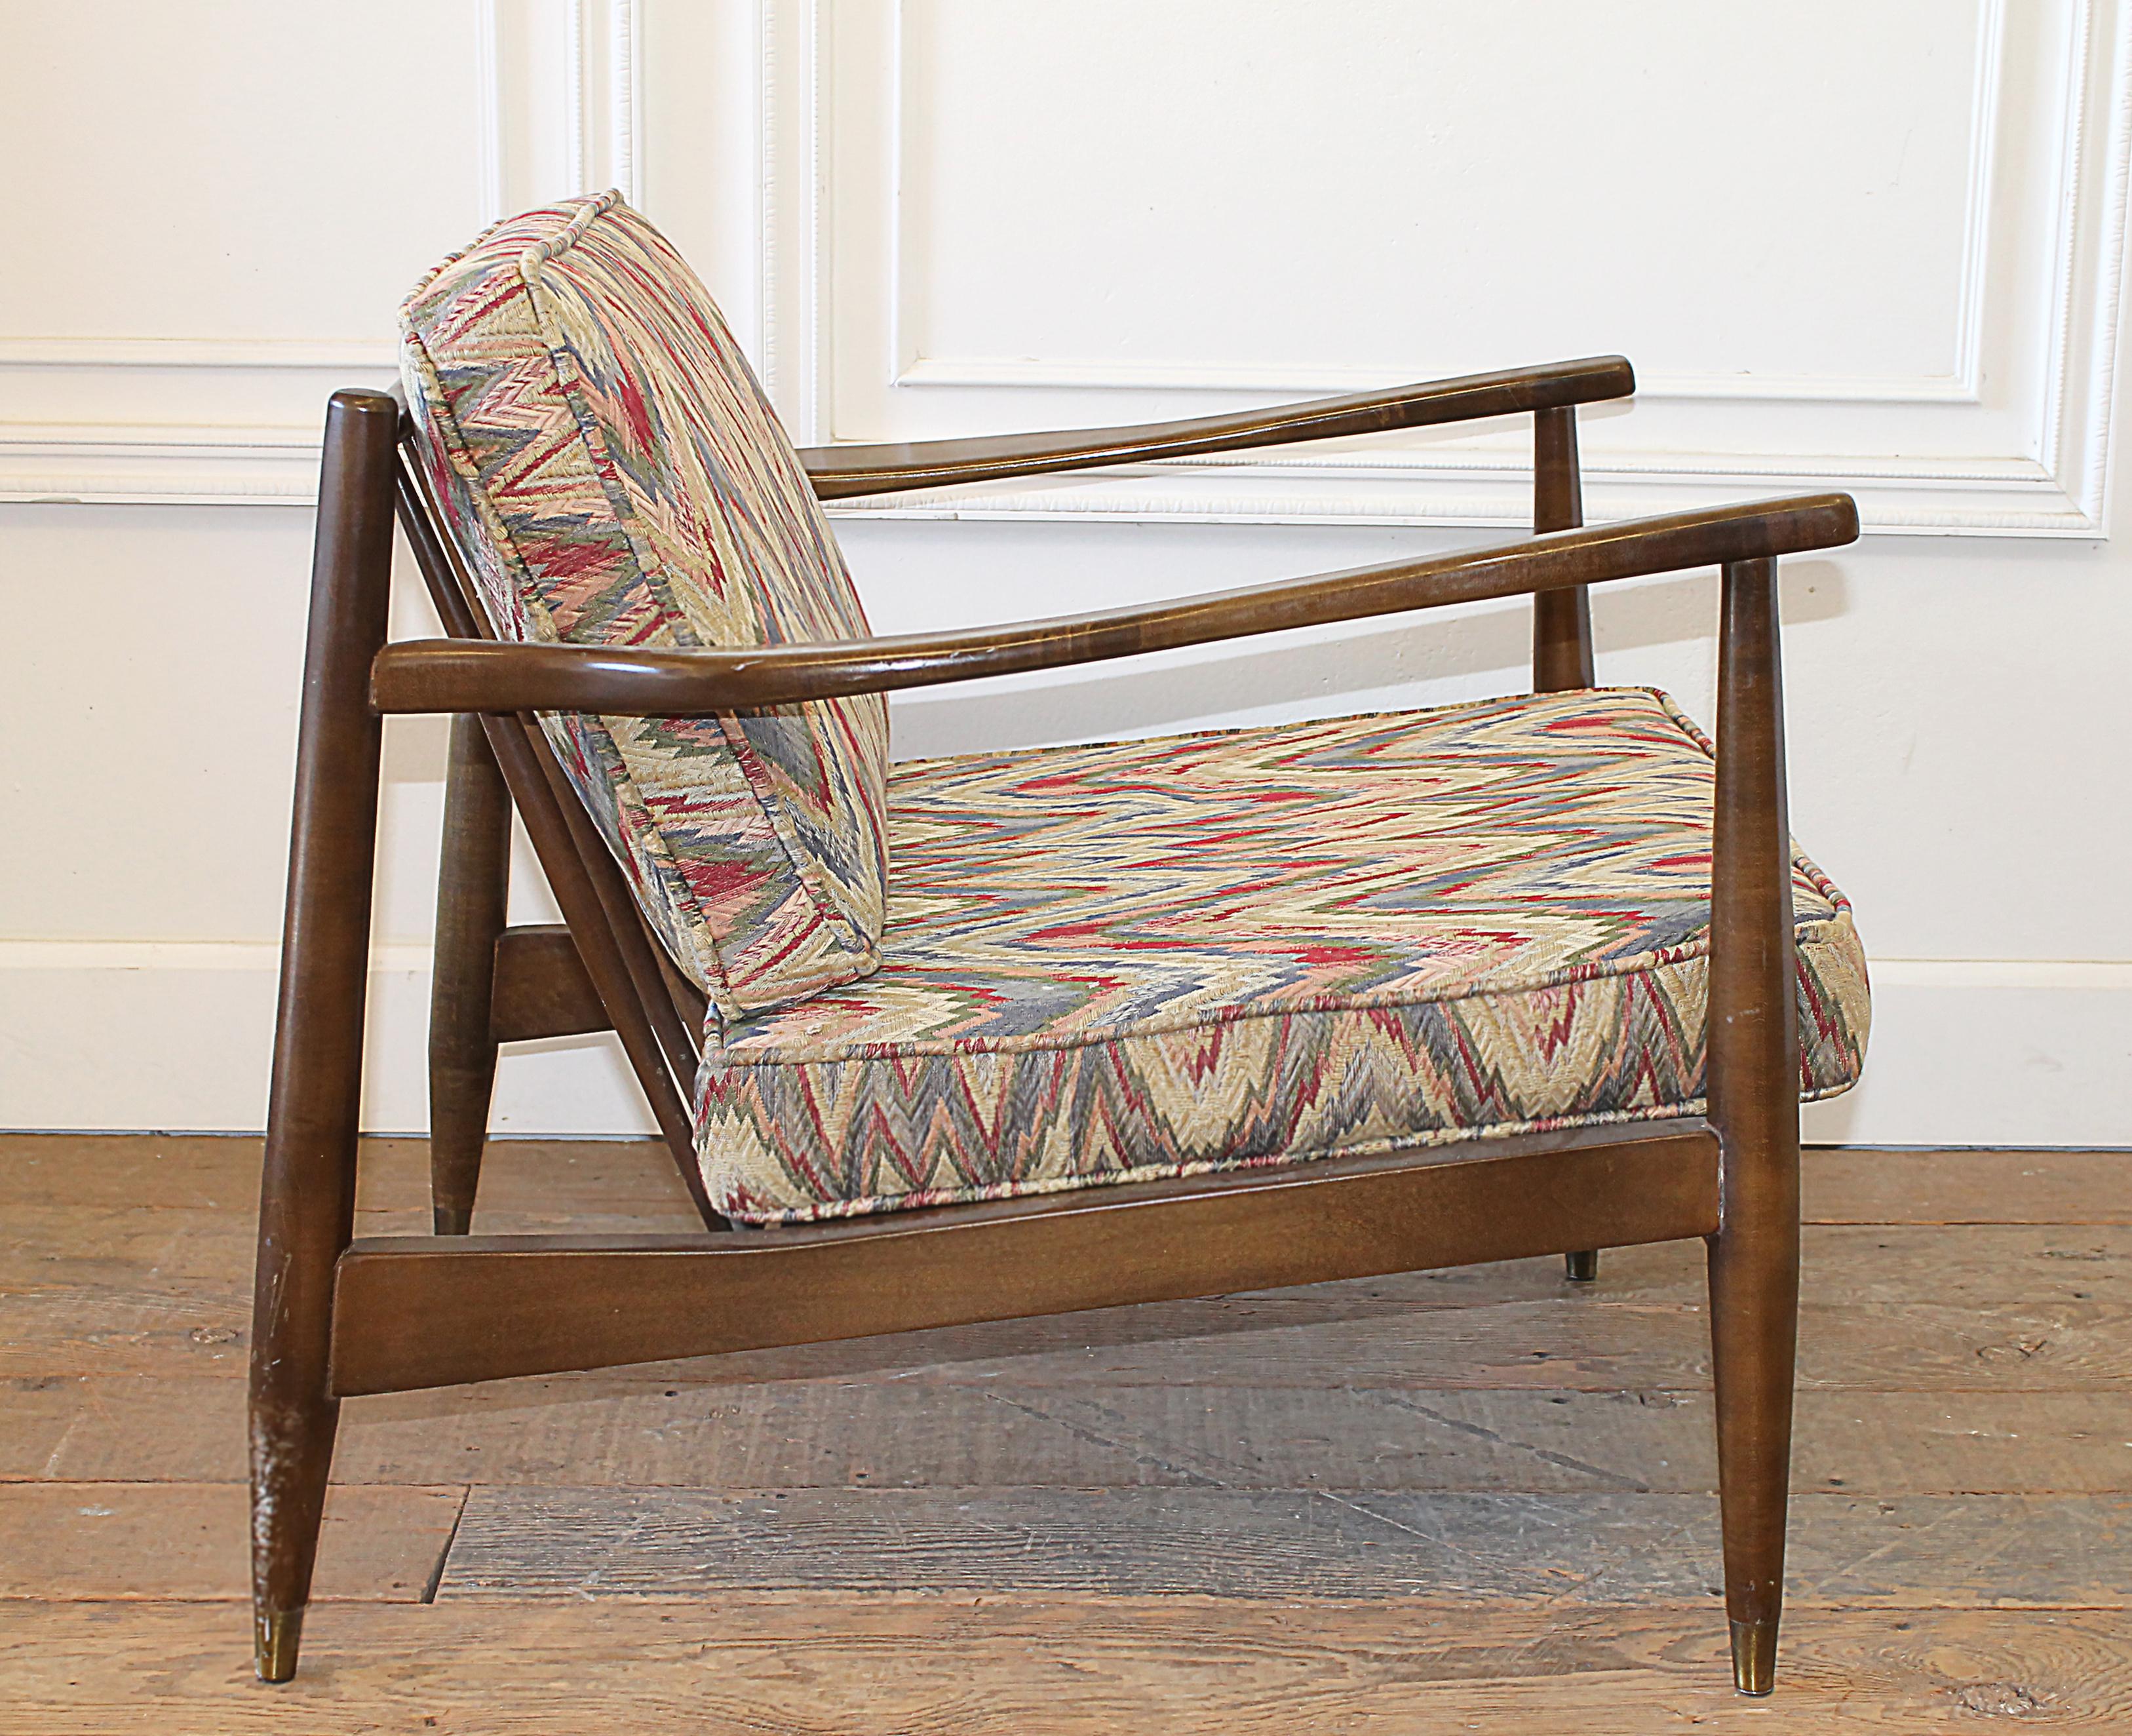 Danish modern chair with flame stitch upholstered cushions
Measures:
31